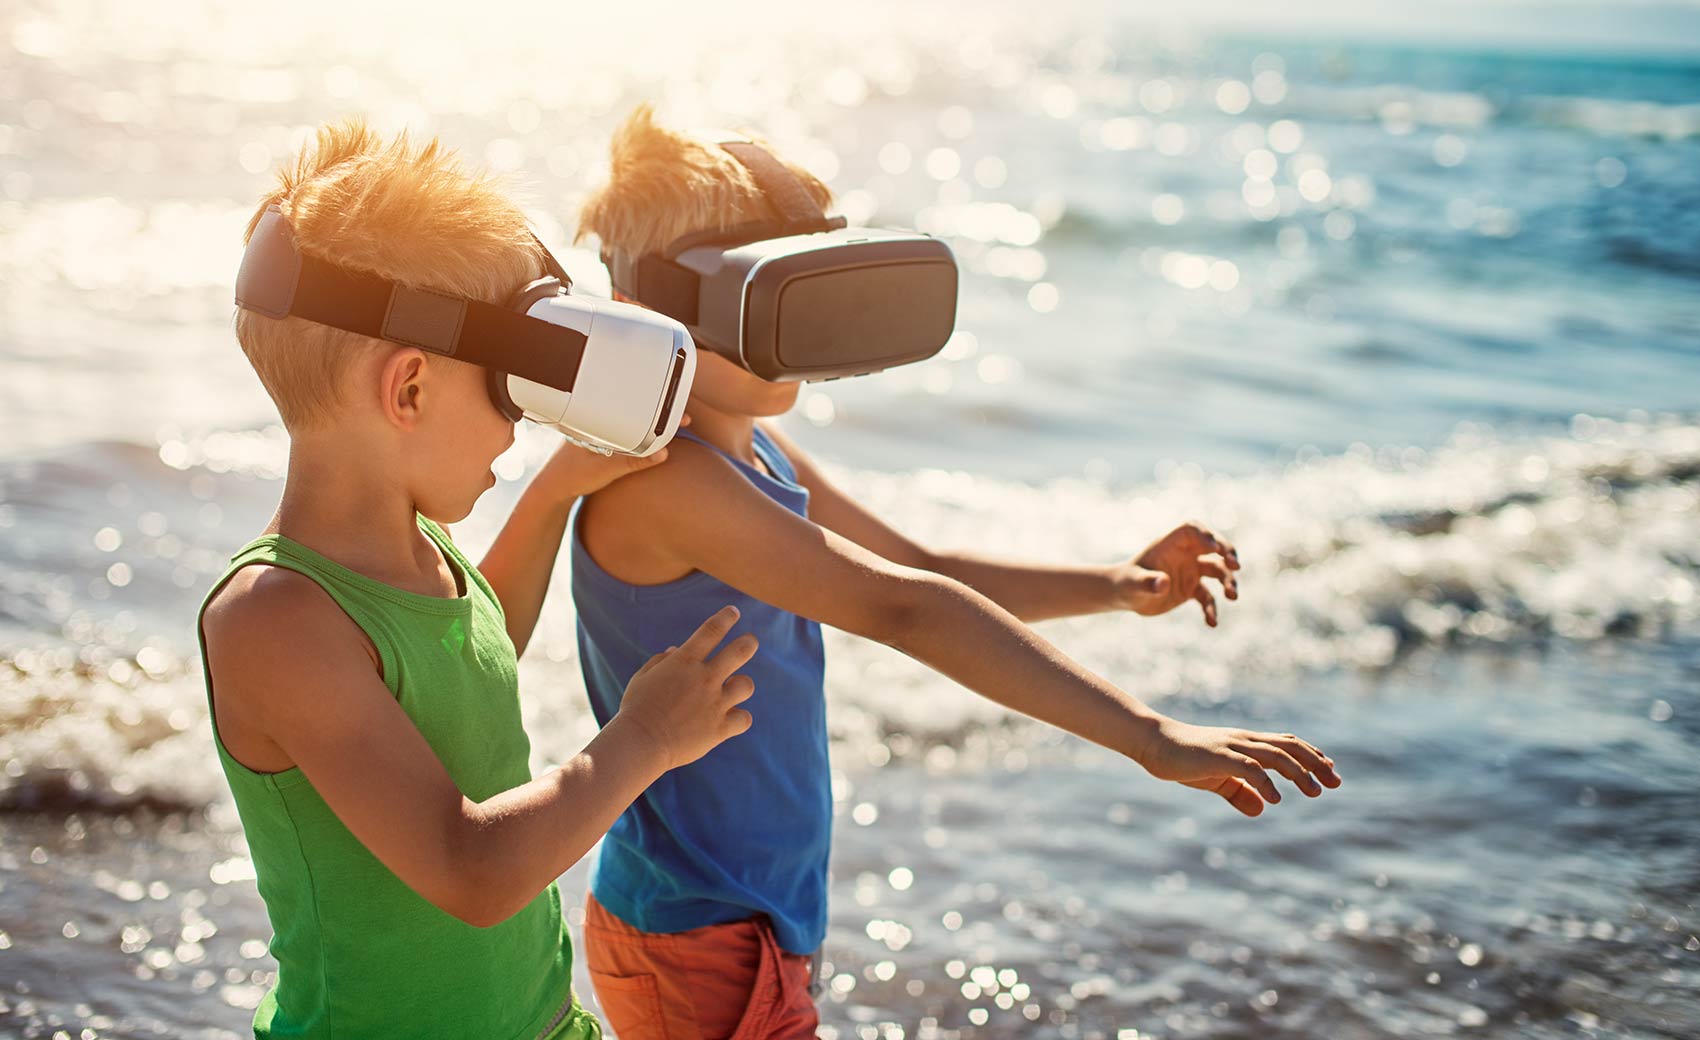 ignorere Ingeniører et eller andet sted Virtual Reality – New reality for the travel industry? | Roland Berger